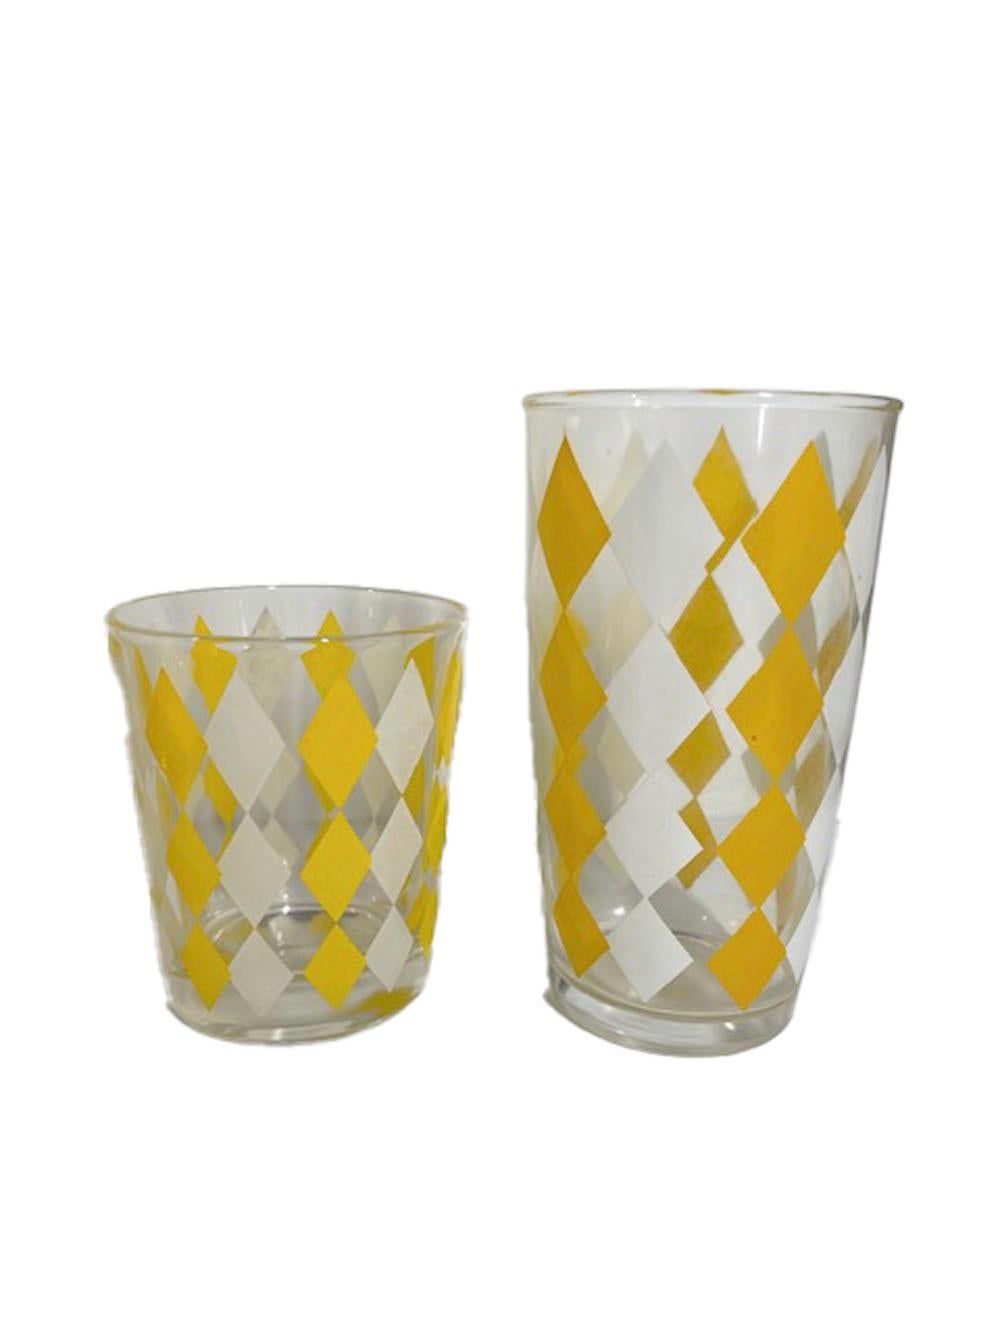 Fourteen-piece, mid-Century Modern cocktail set with alternating columns of yellow and white diamonds on clear glass.

1 - Cocktail shaker: 10